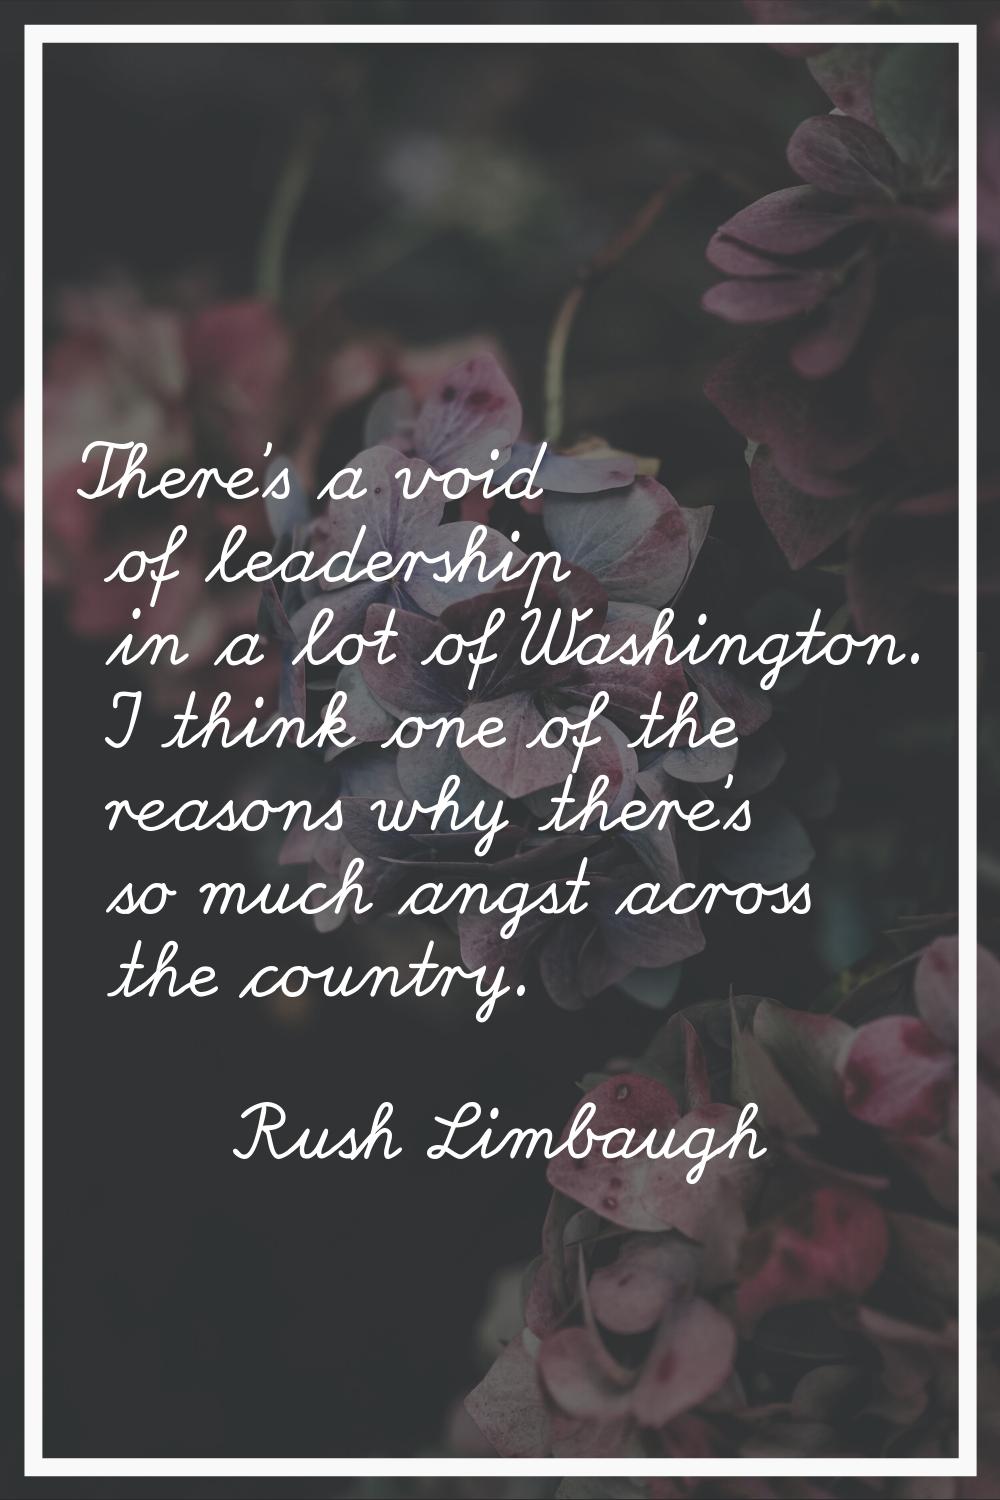 There's a void of leadership in a lot of Washington. I think one of the reasons why there's so much